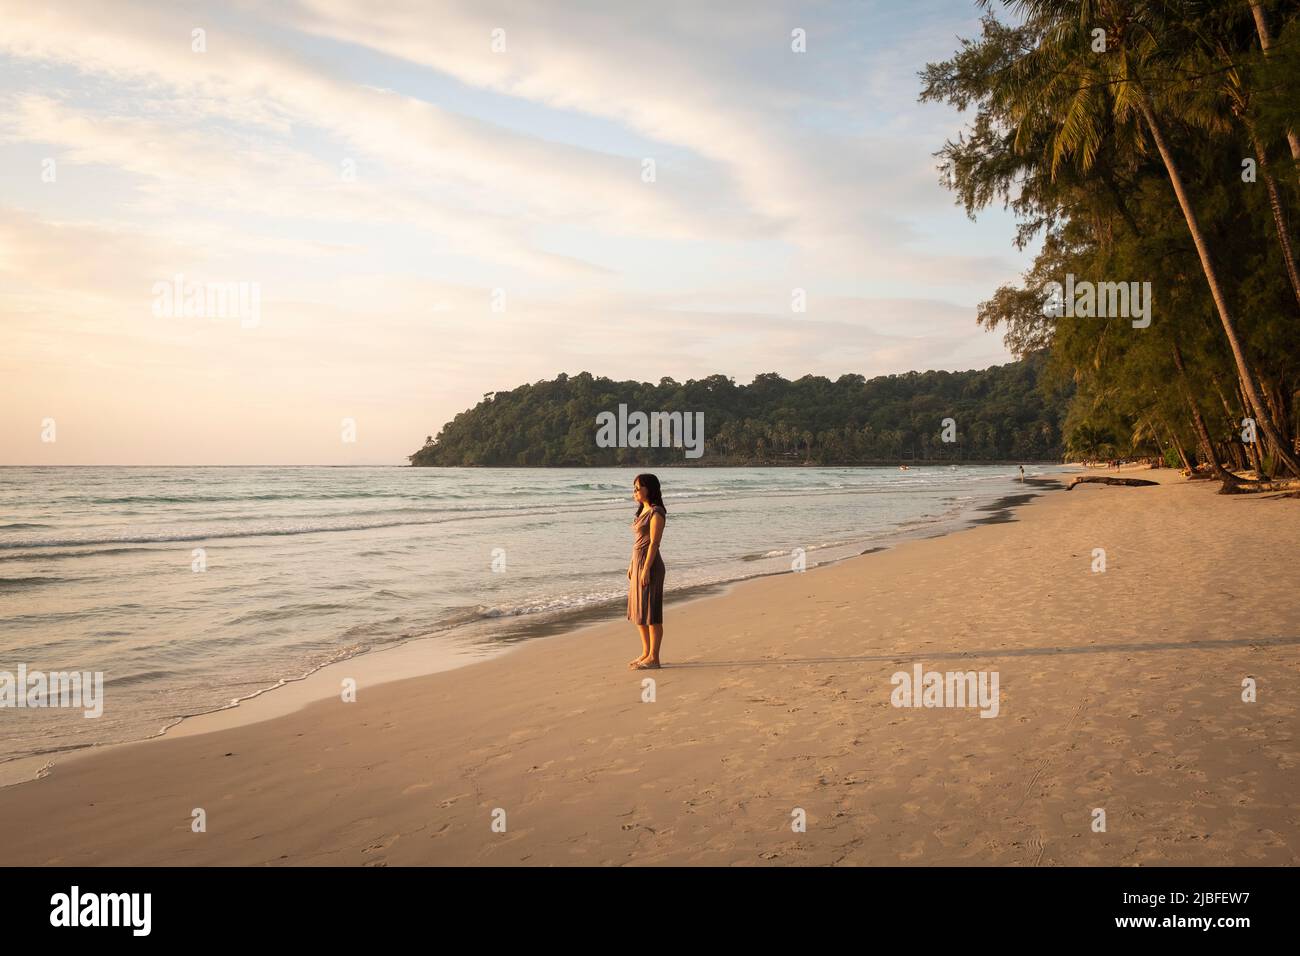 Woman on tropical beach at sunset Stock Photo